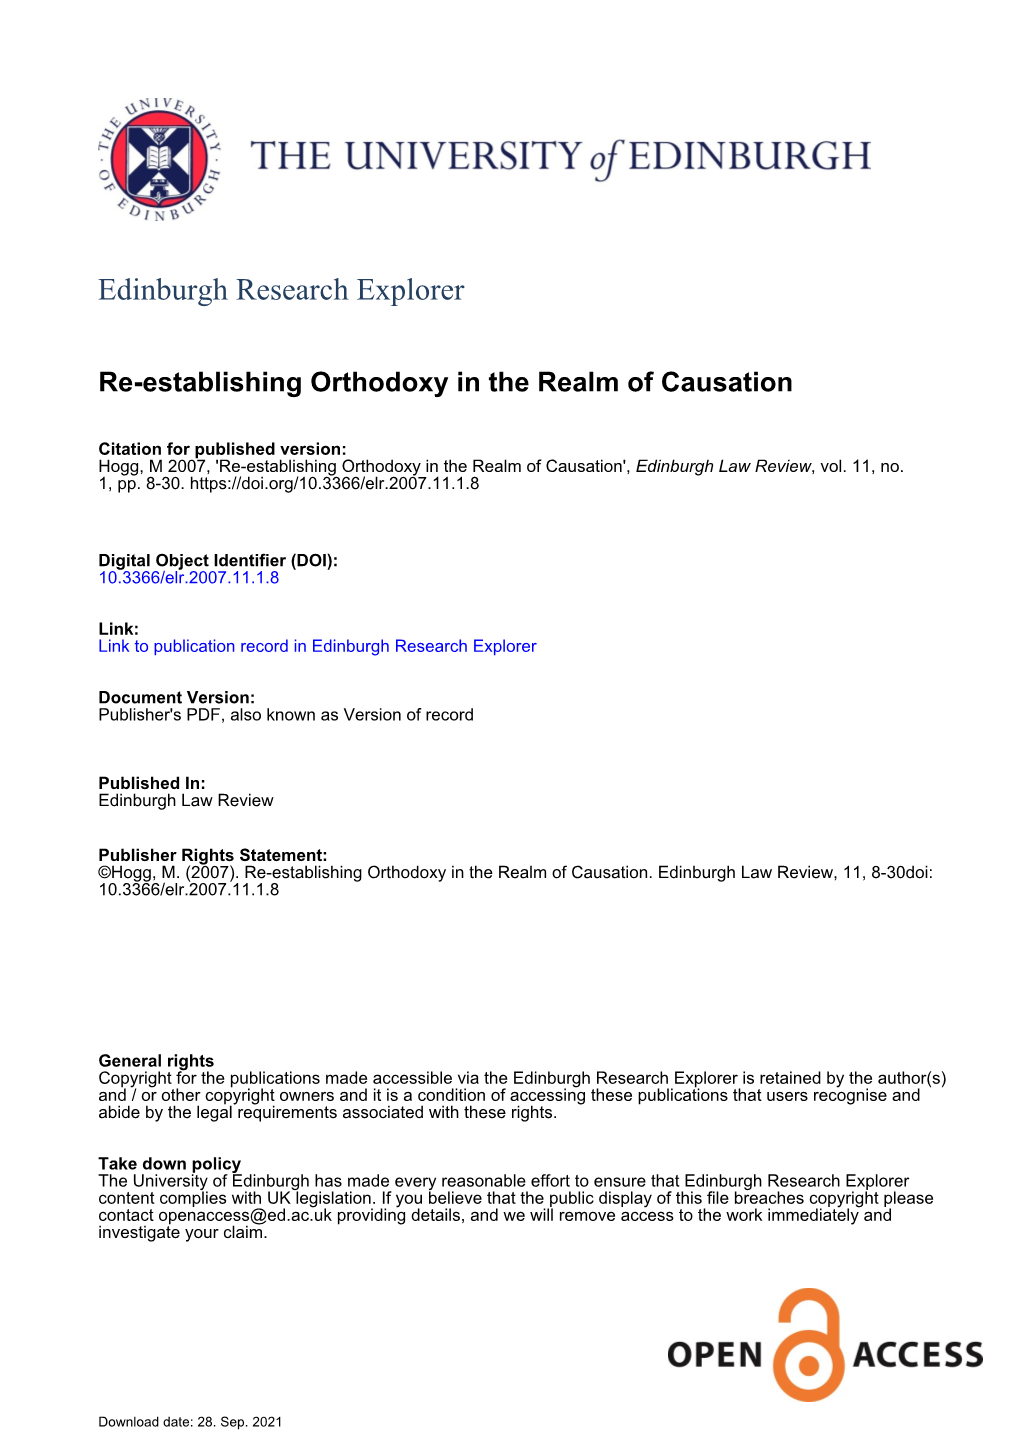 Re-Establishing Orthodoxy in the Realm of Causation